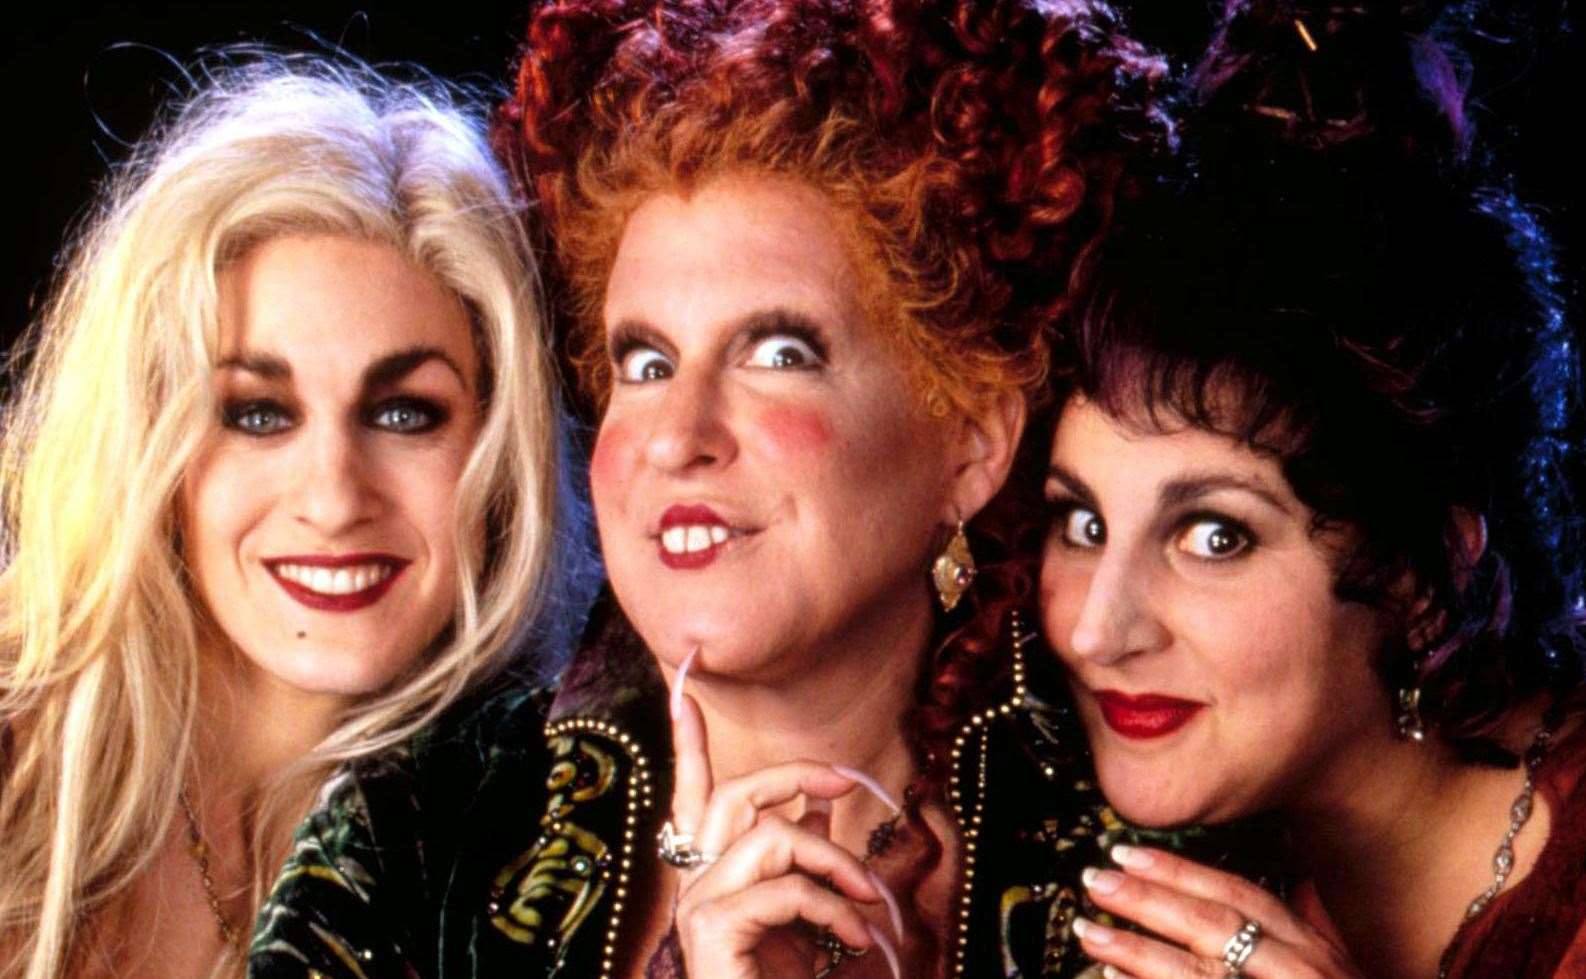 The witches are back - Hocus Pocus is being screened for Halloween